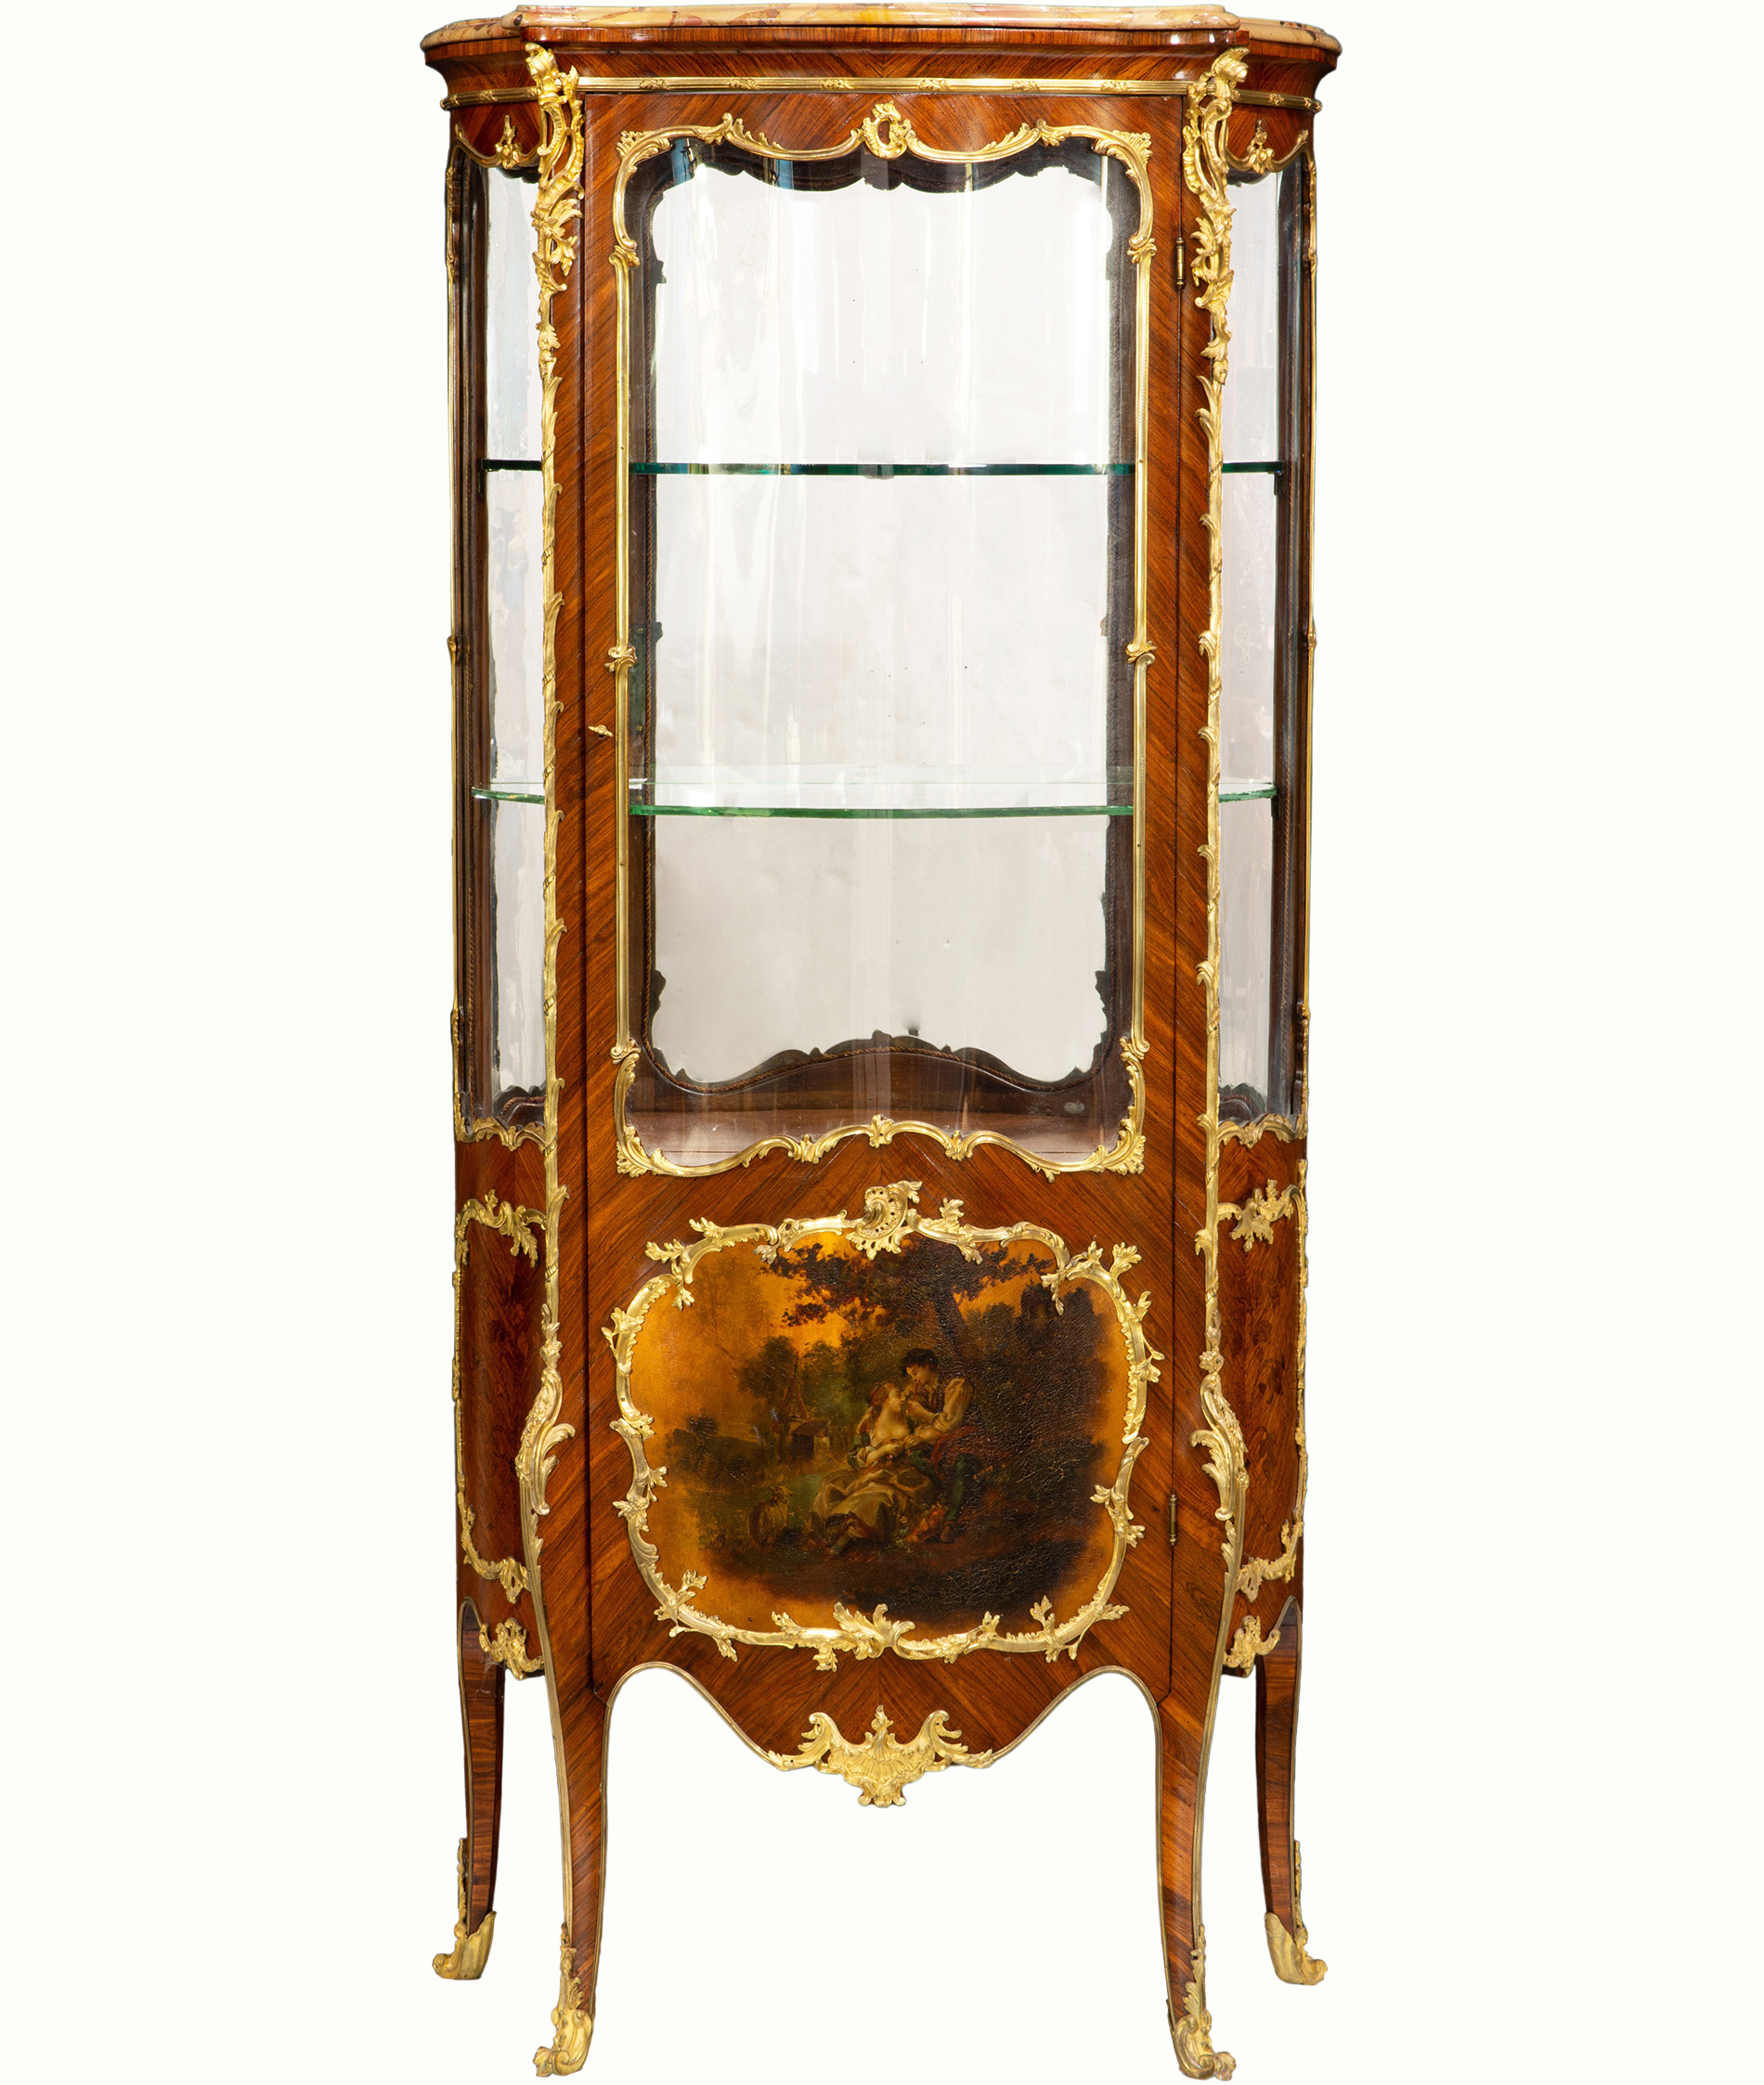 A Louis XV Vernis Martin style gilt bronze mounted kingwood cabinet, late 19th century.